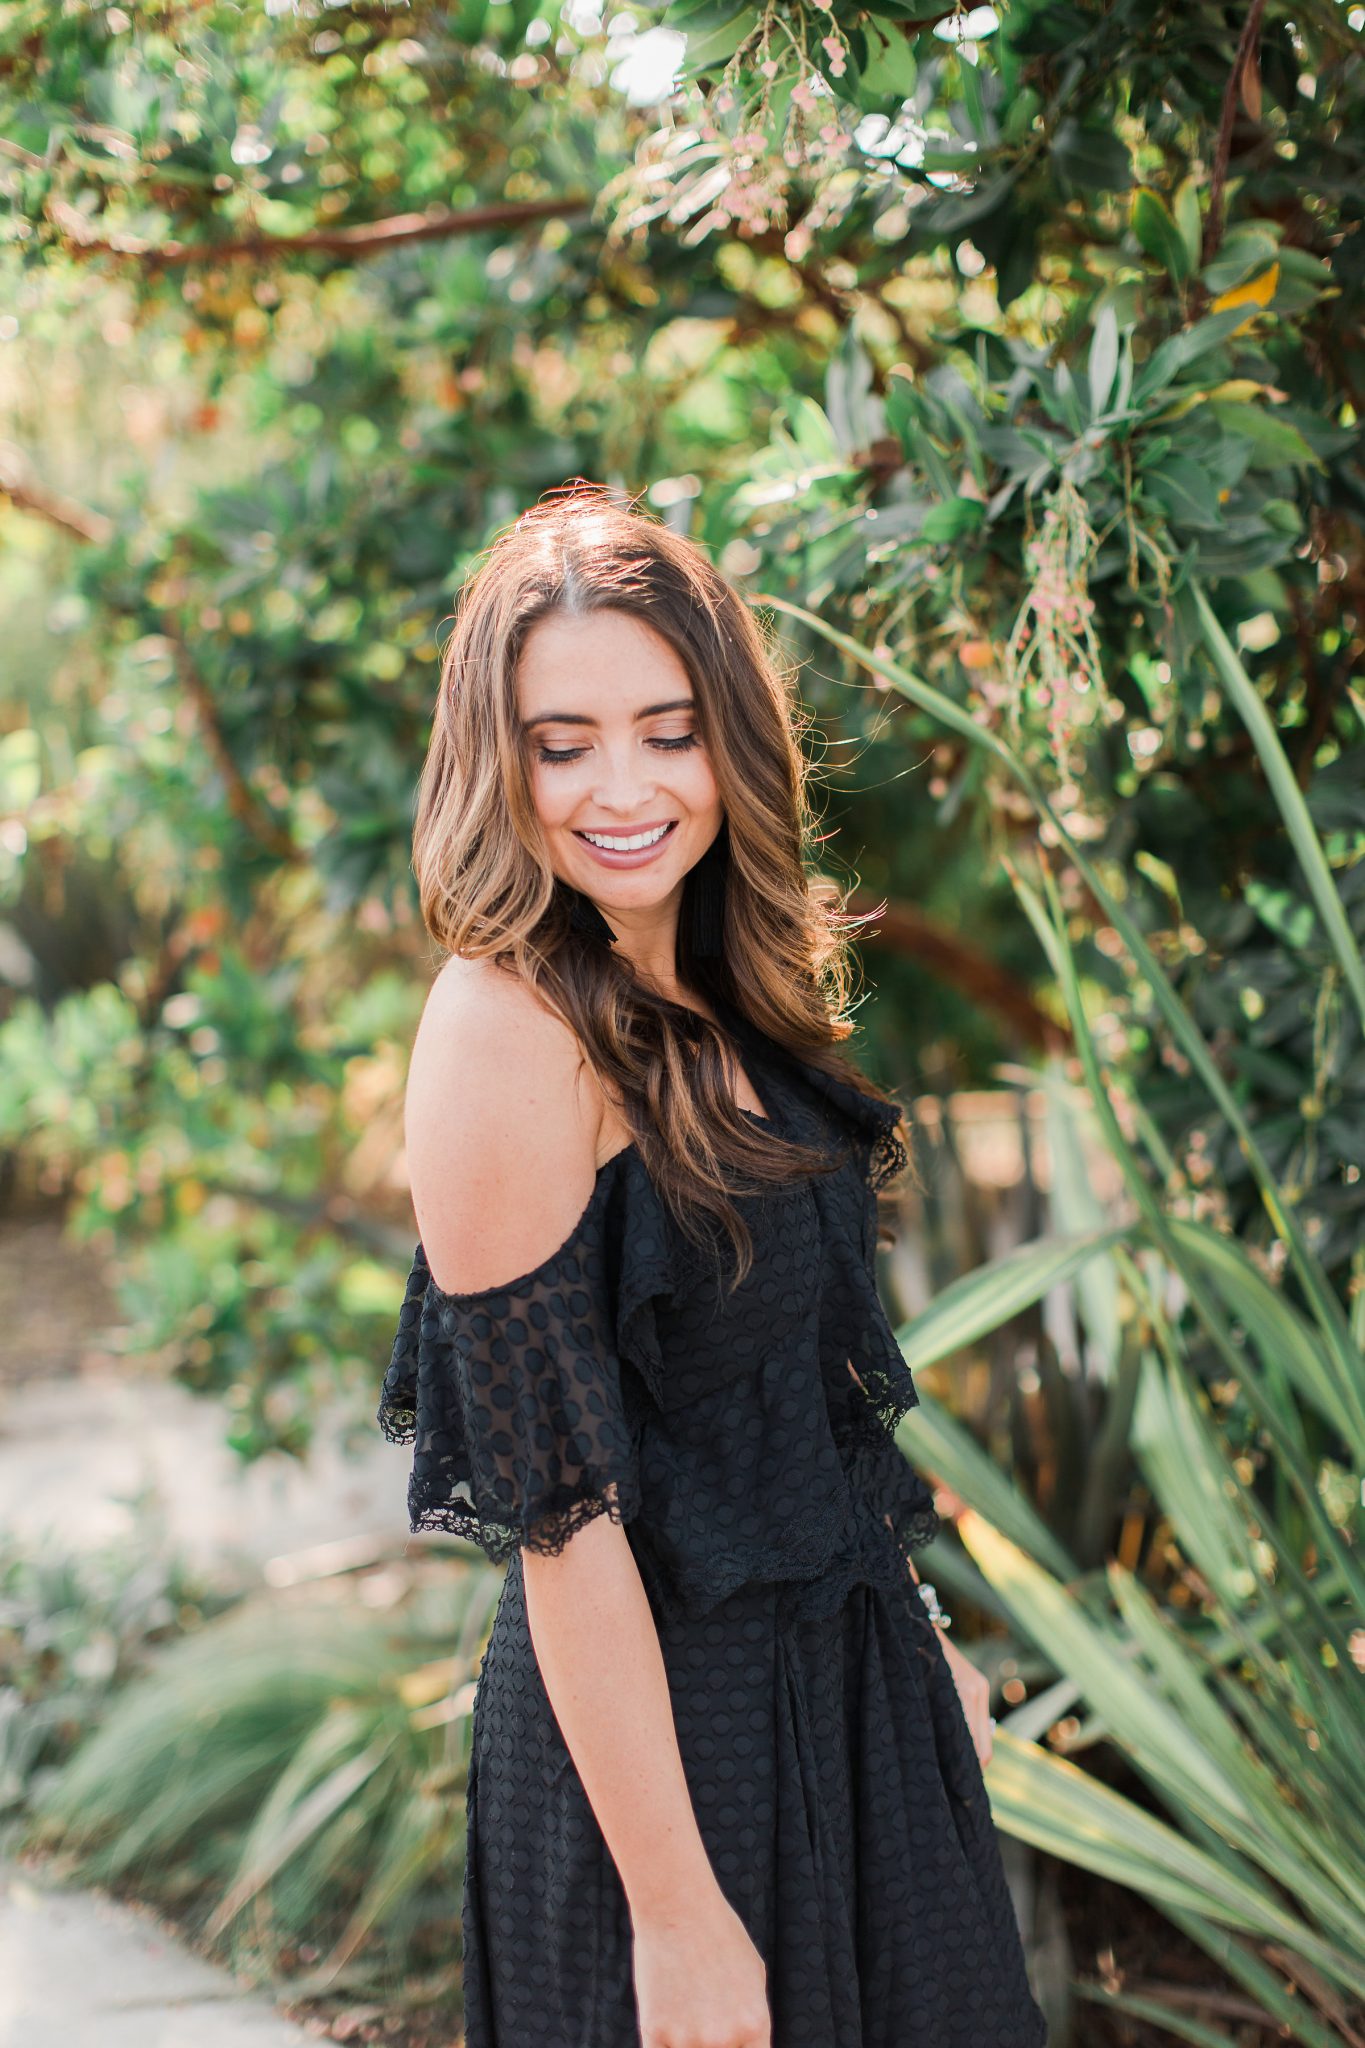 Maxie Elle | Little black dress - Nordstrom Half Yearly Sale Picks & The Perfect LBD by popular Orange County fashion blogger Maxie Elle